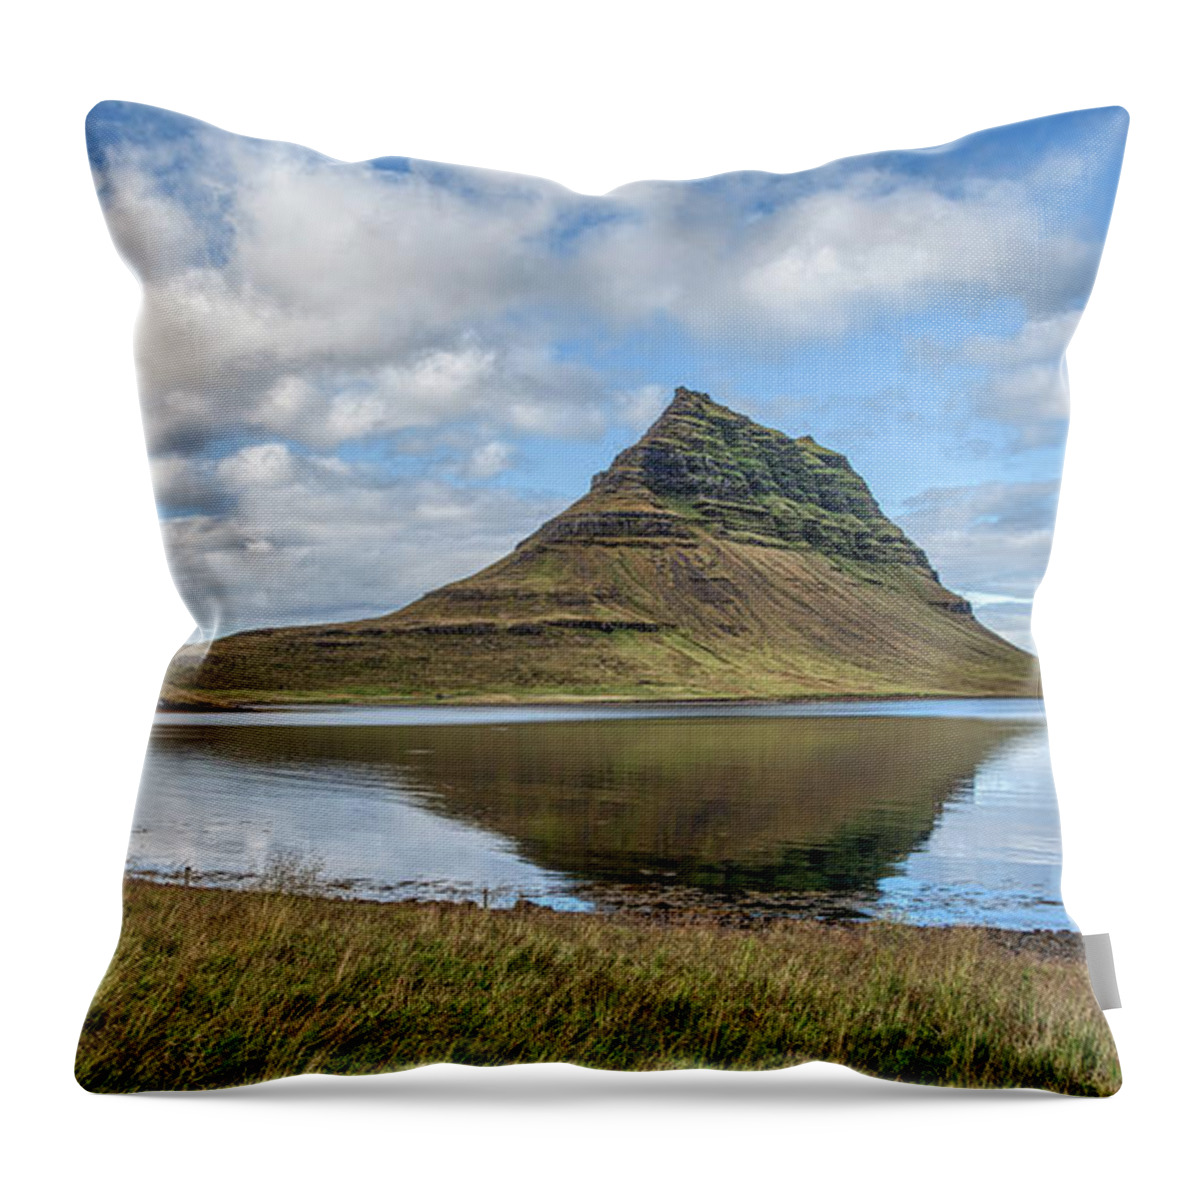 David Letts Throw Pillow featuring the photograph Iceland Mountain by David Letts